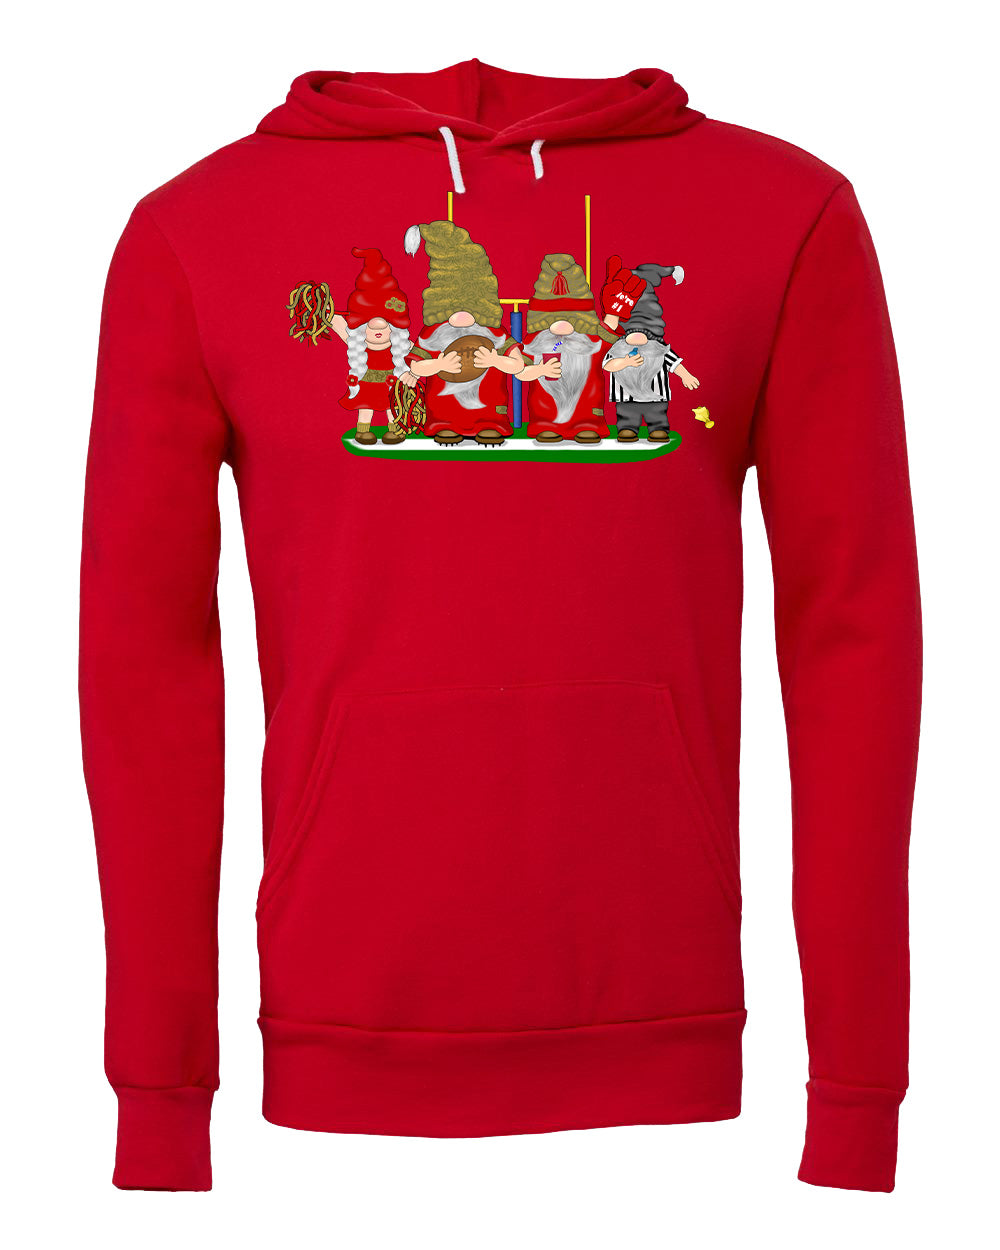 Red & Gold Football Gnomes (similar to San Fransisco) on Hoodie